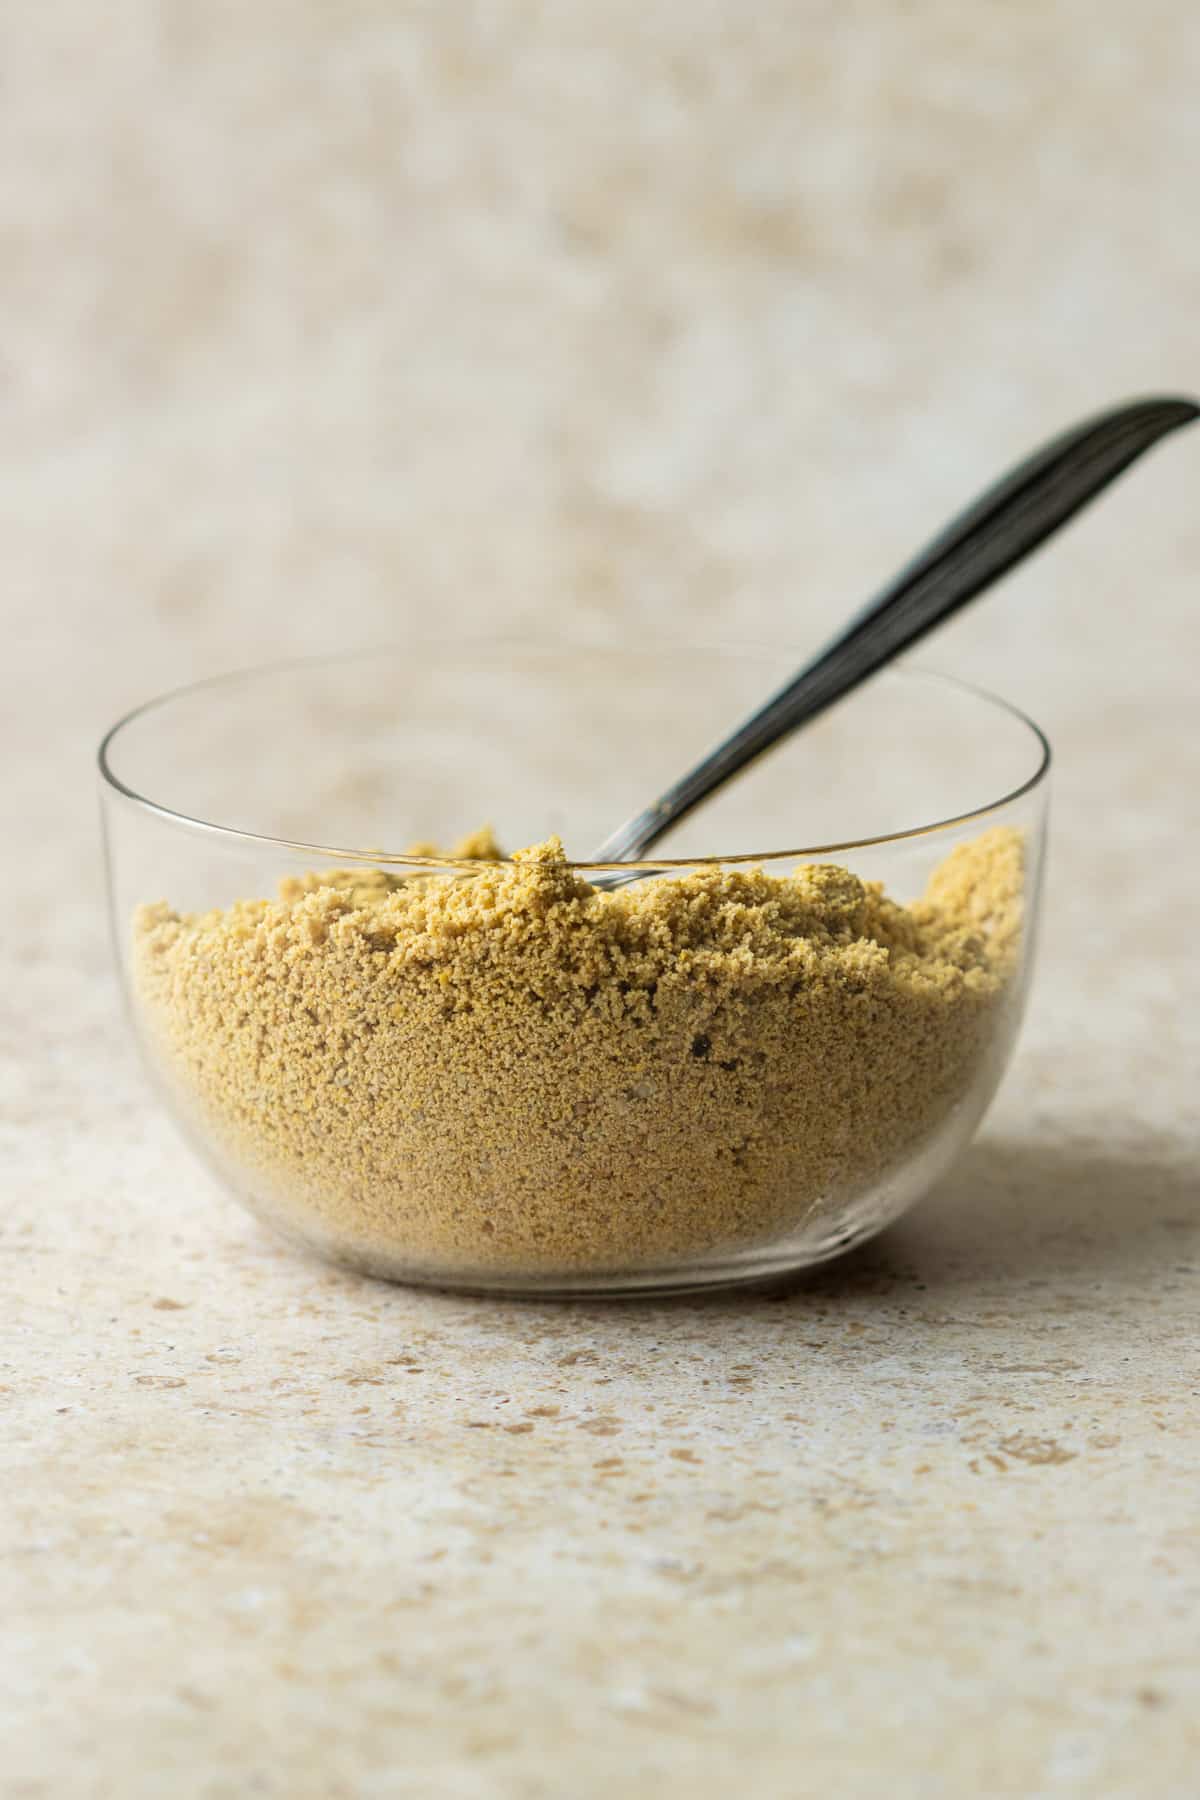 Homemade sunflower seed vegan parmesan cheese in a clear bowl with a spoon.